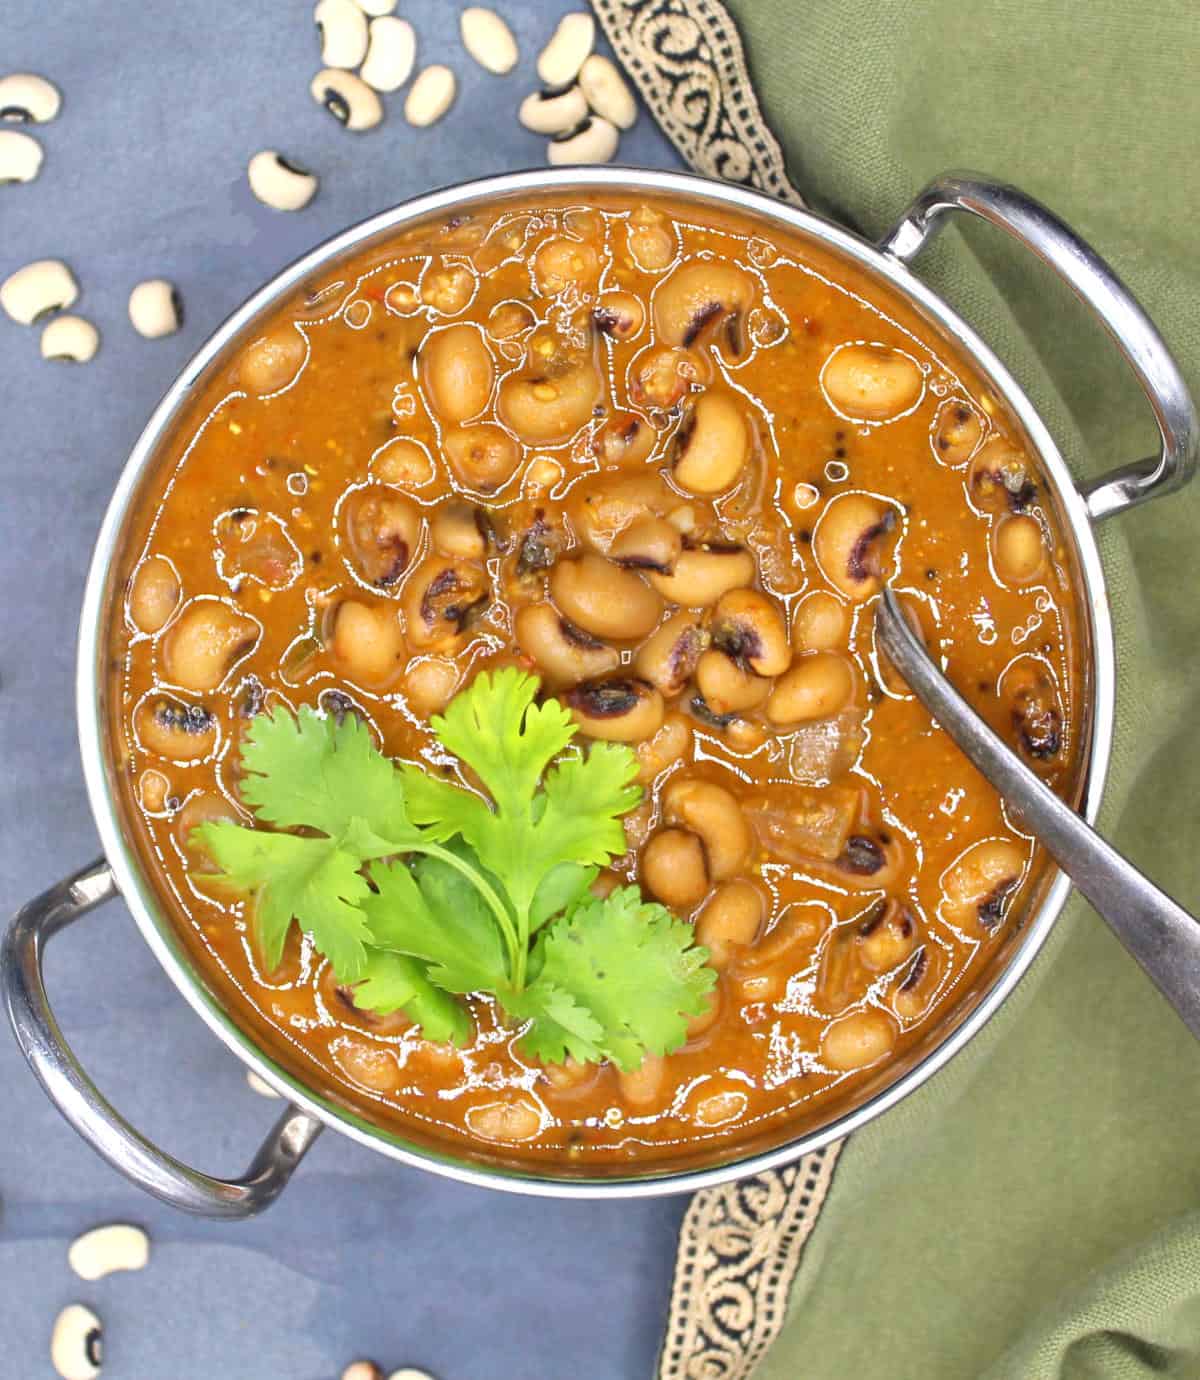 Black-eyed peas curry in karahi with cilantro garnish and beans strewn around.